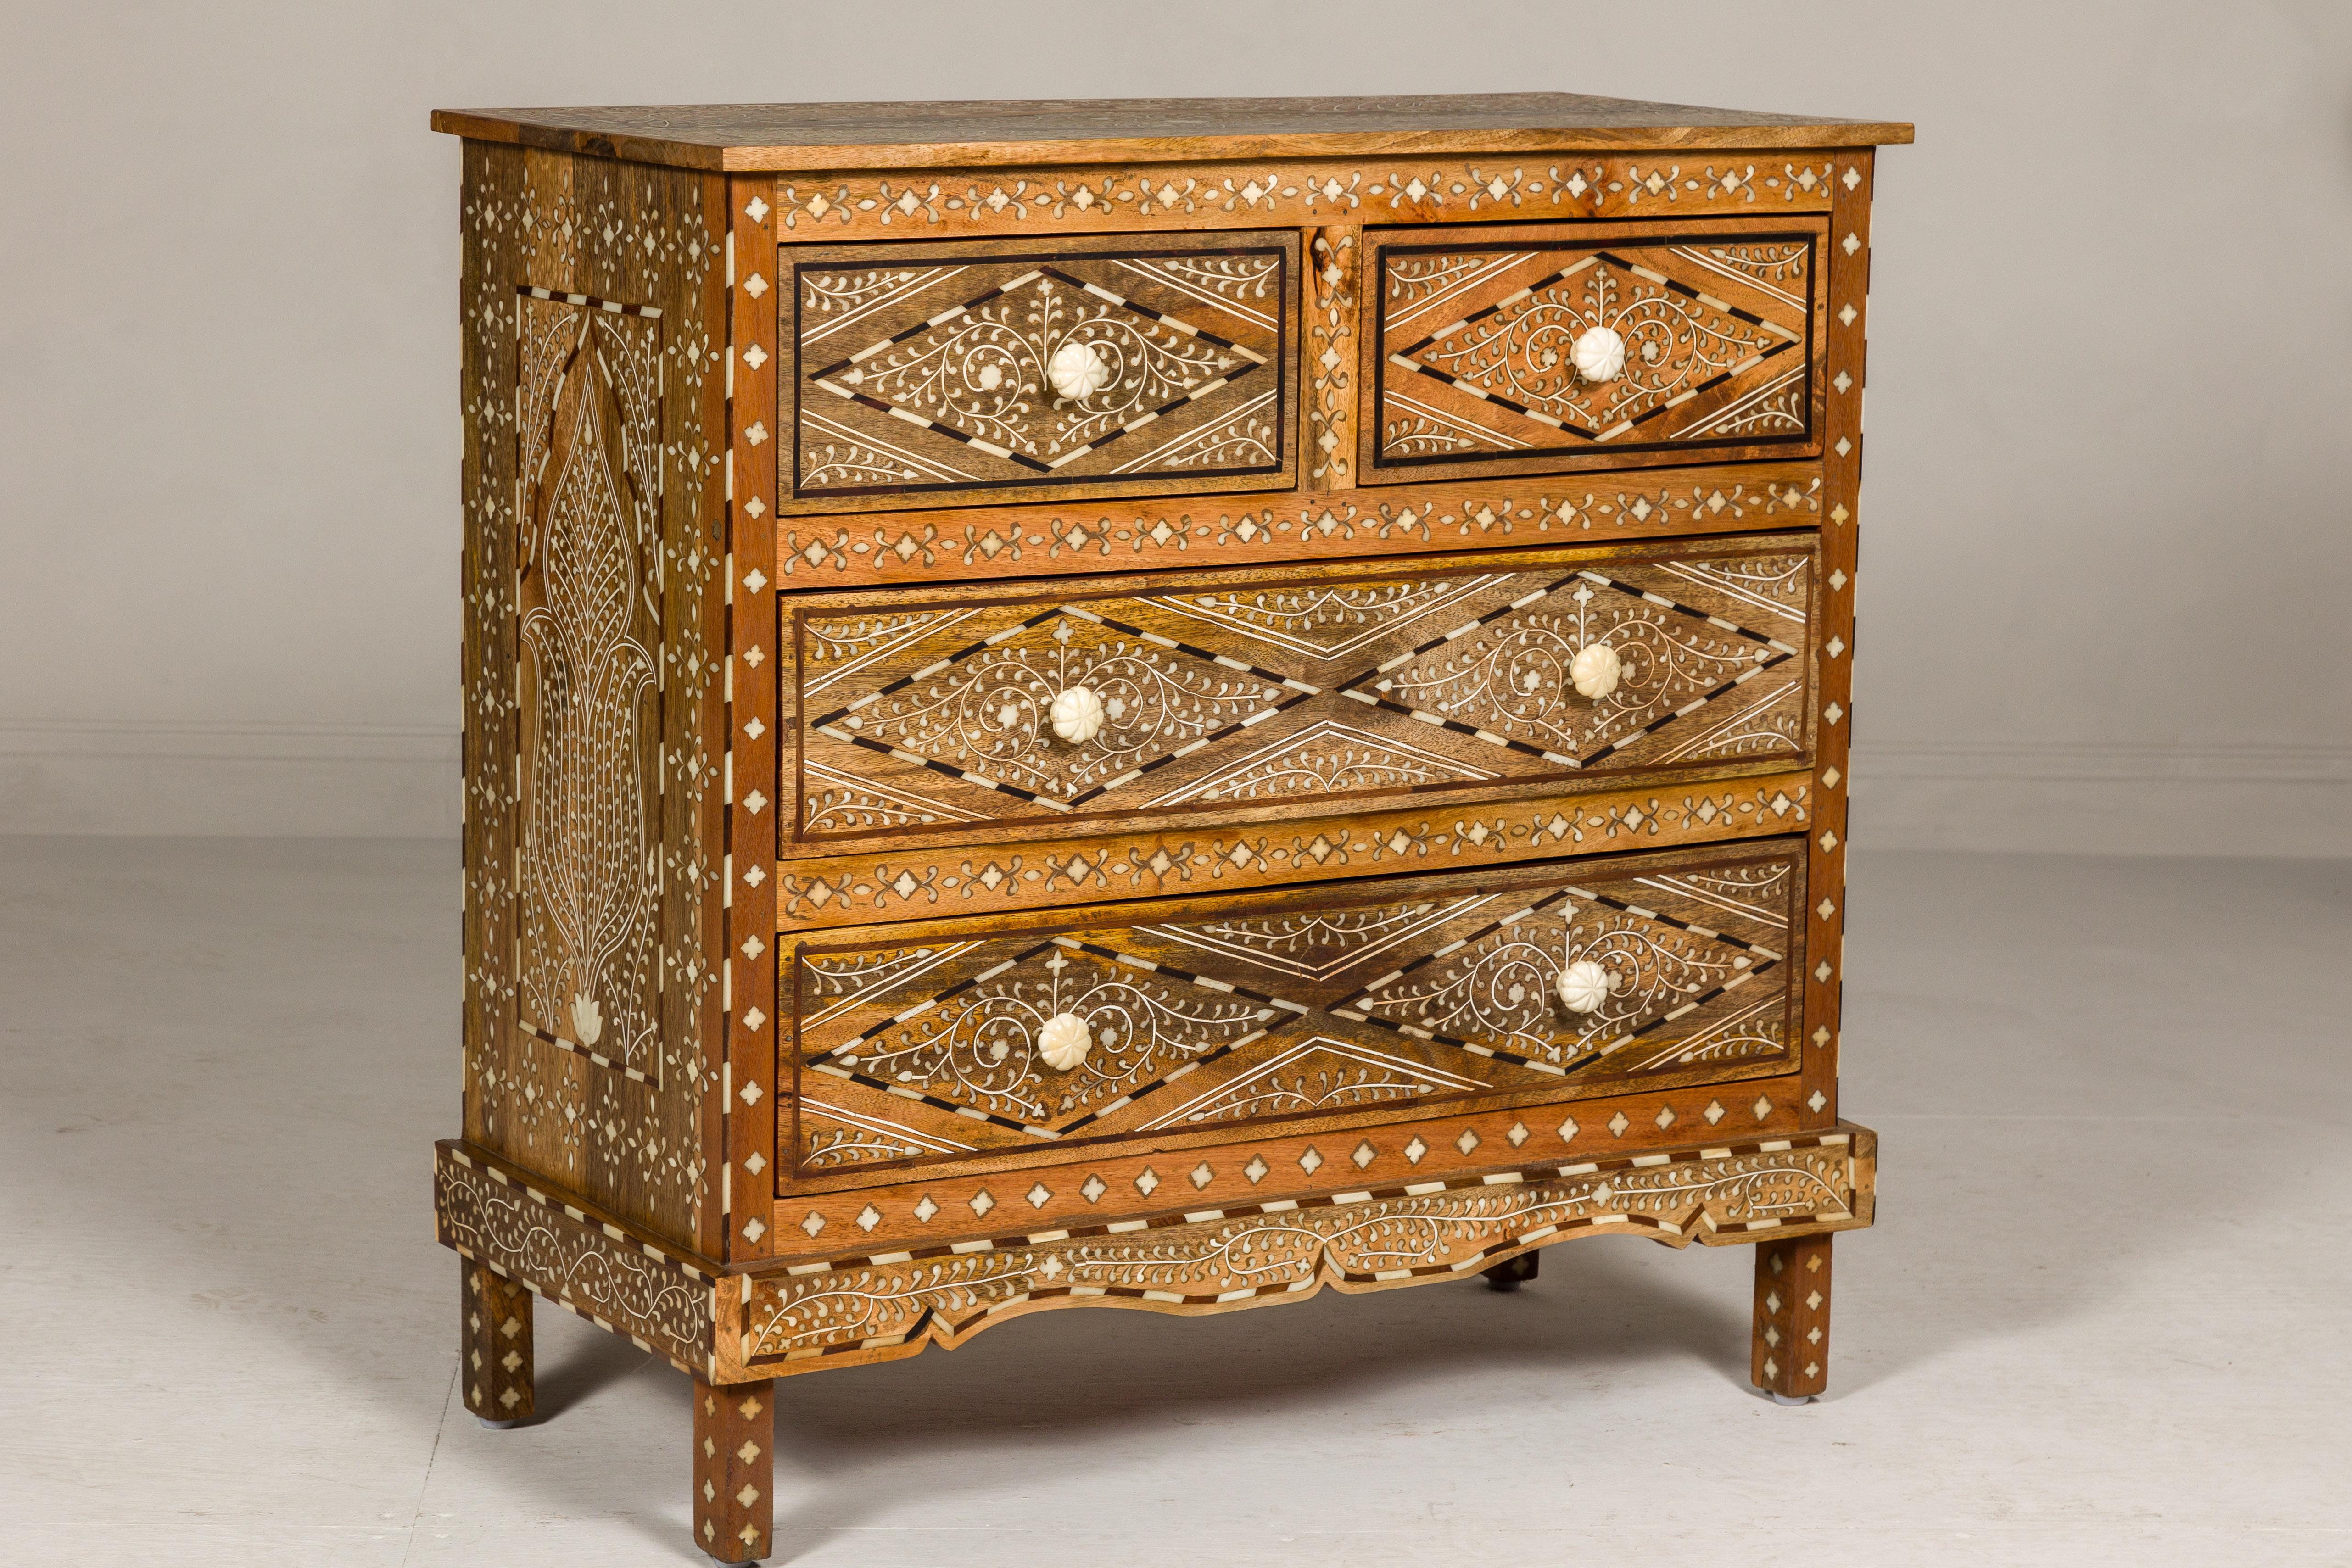 Anglo-Indian Style Mango Wood Four-Drawer Chest with Foliage Themed Bone Inlay For Sale 5